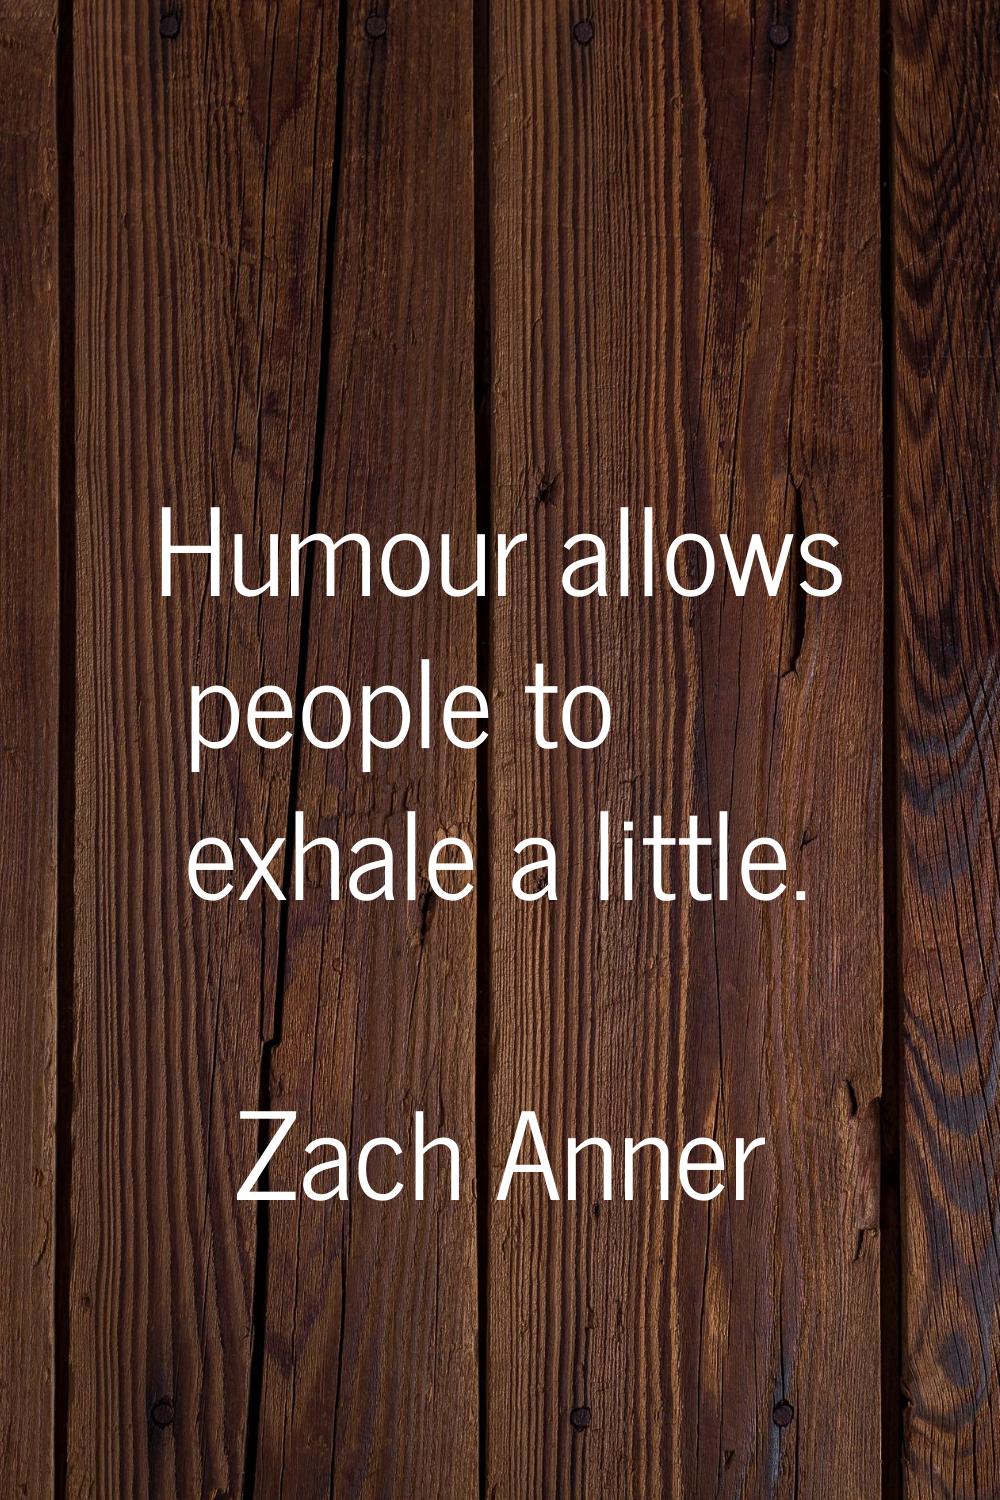 Humour allows people to exhale a little.